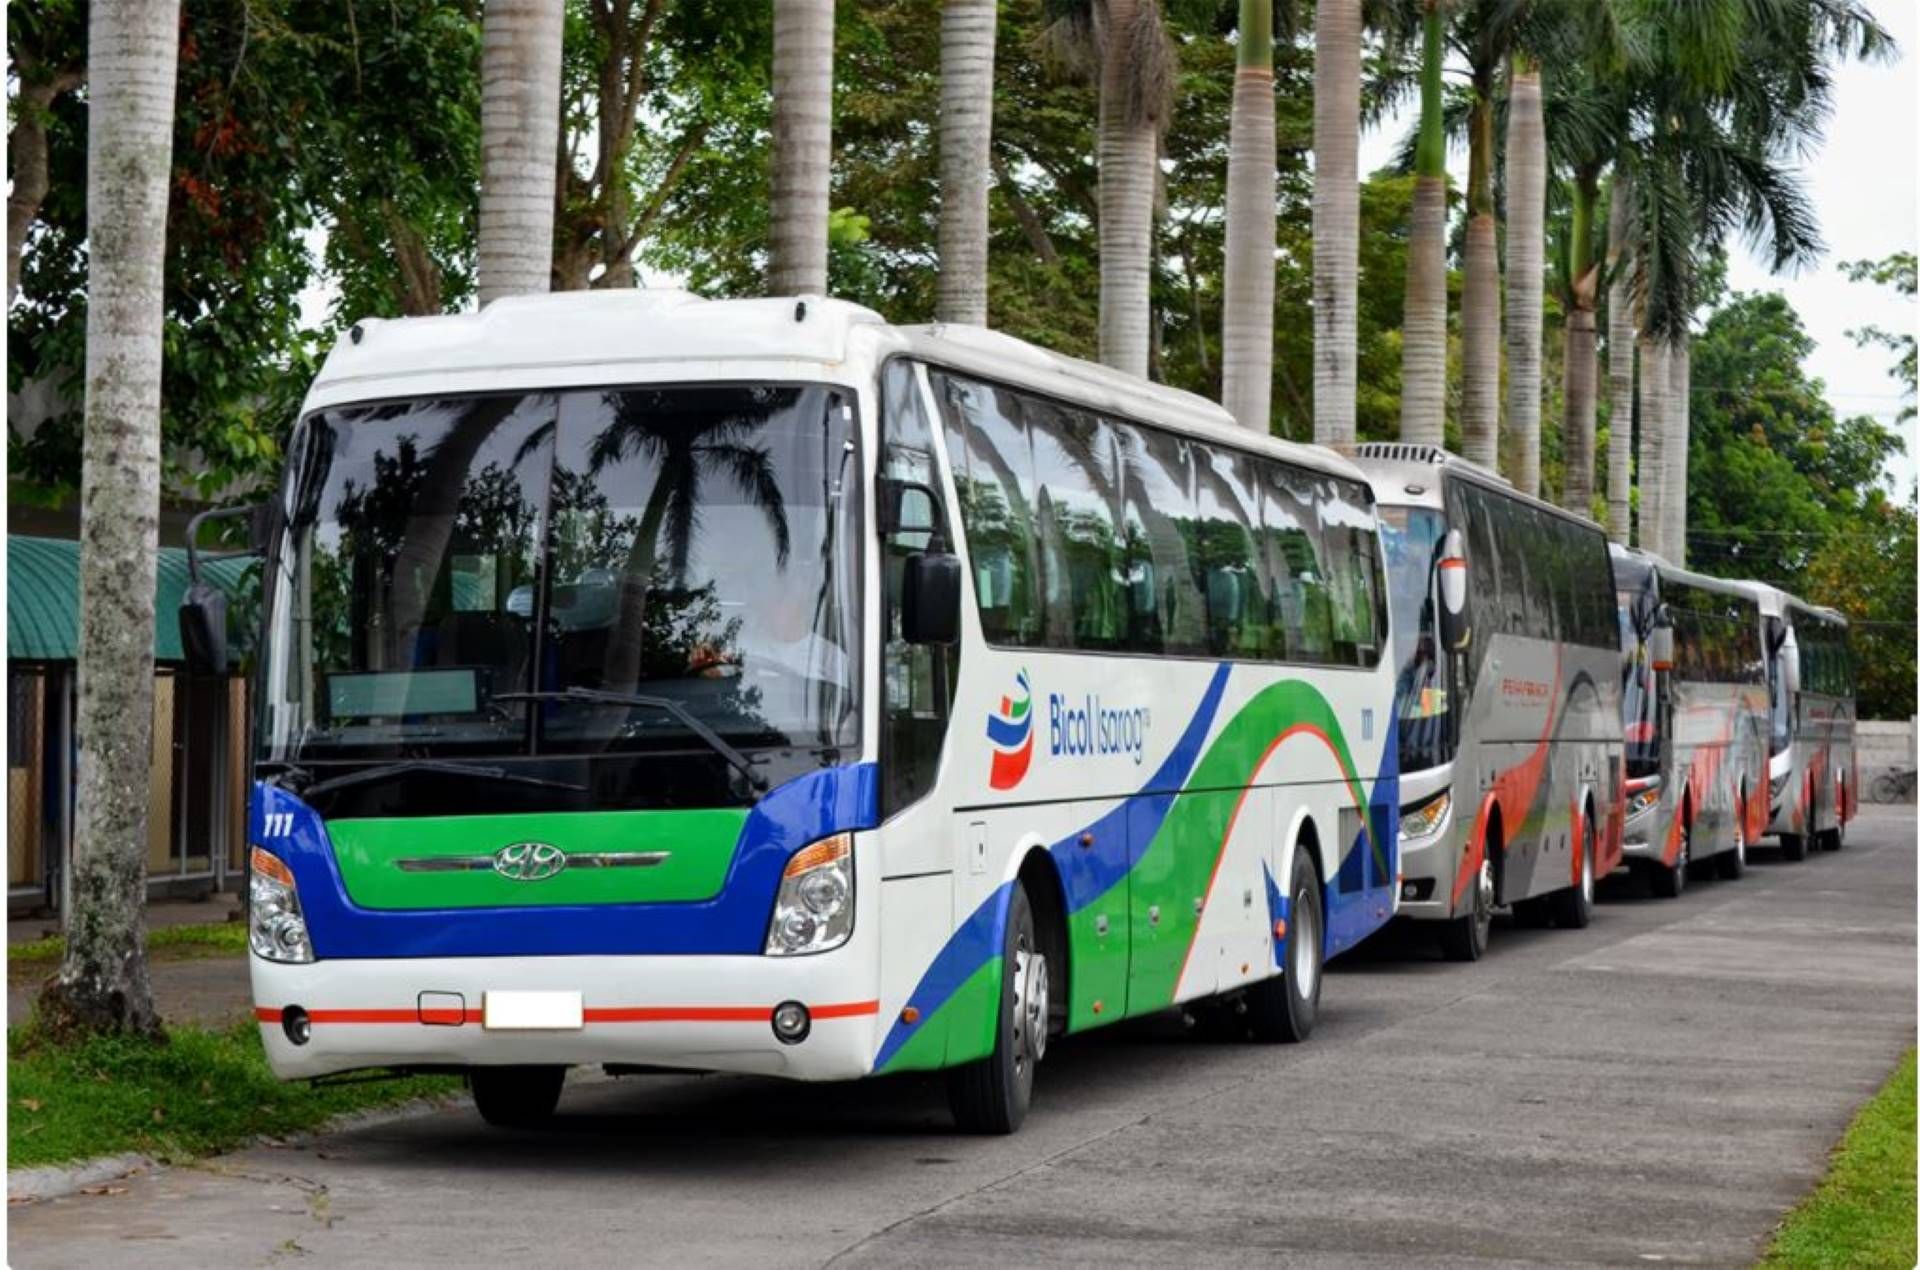 penafrancia tours and travel transport incorporated